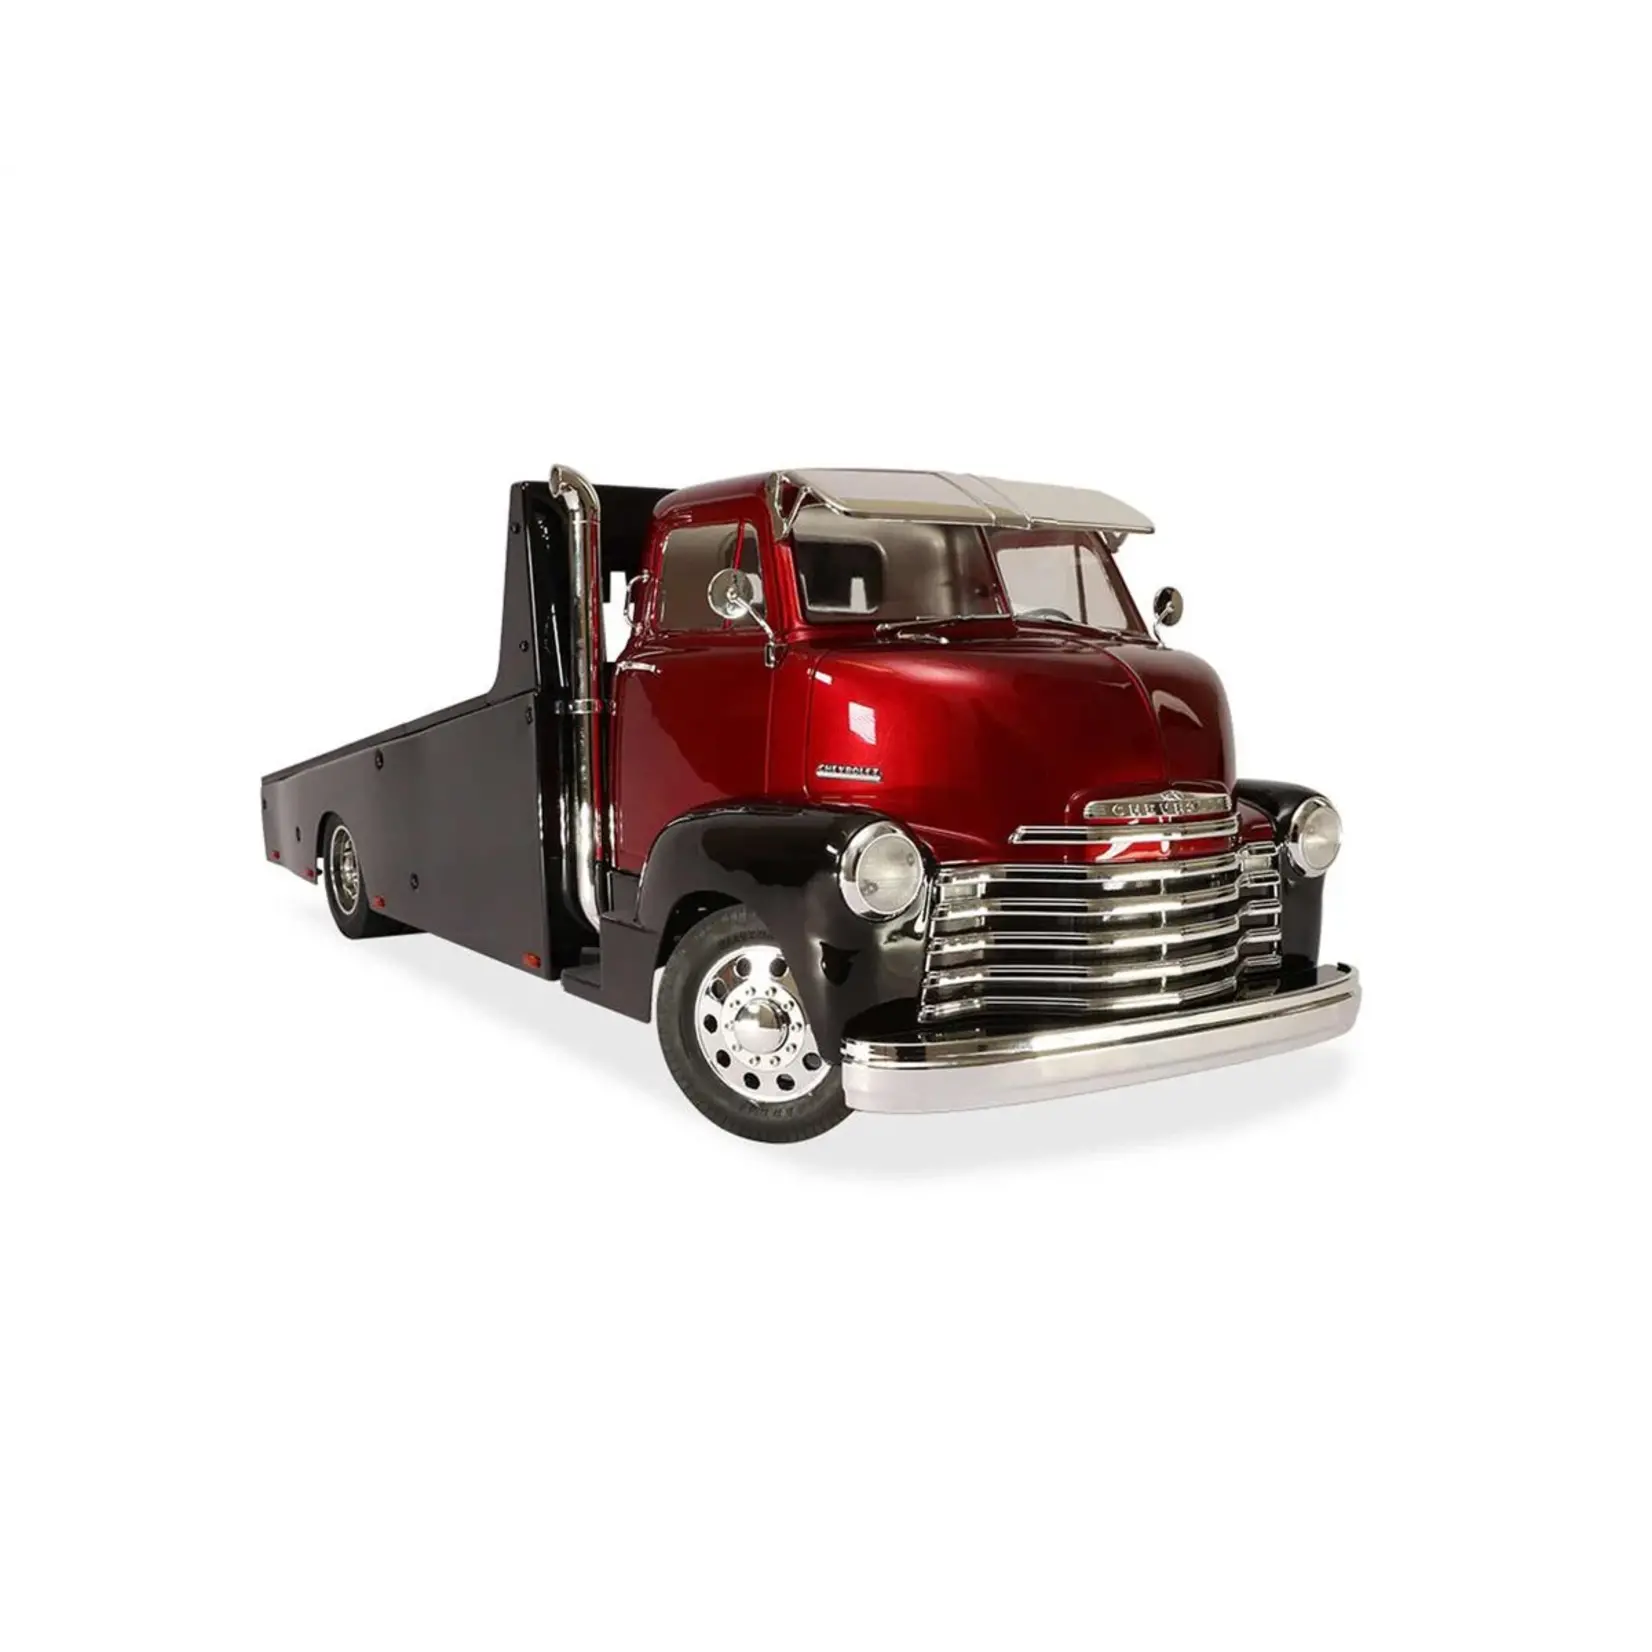 Redcat Racing Redcat 1953 Chevrolet Cab Over Engine RTR 1/10 Scale Custom Hauler (Red) w/2.4GHz Radio #RER22770